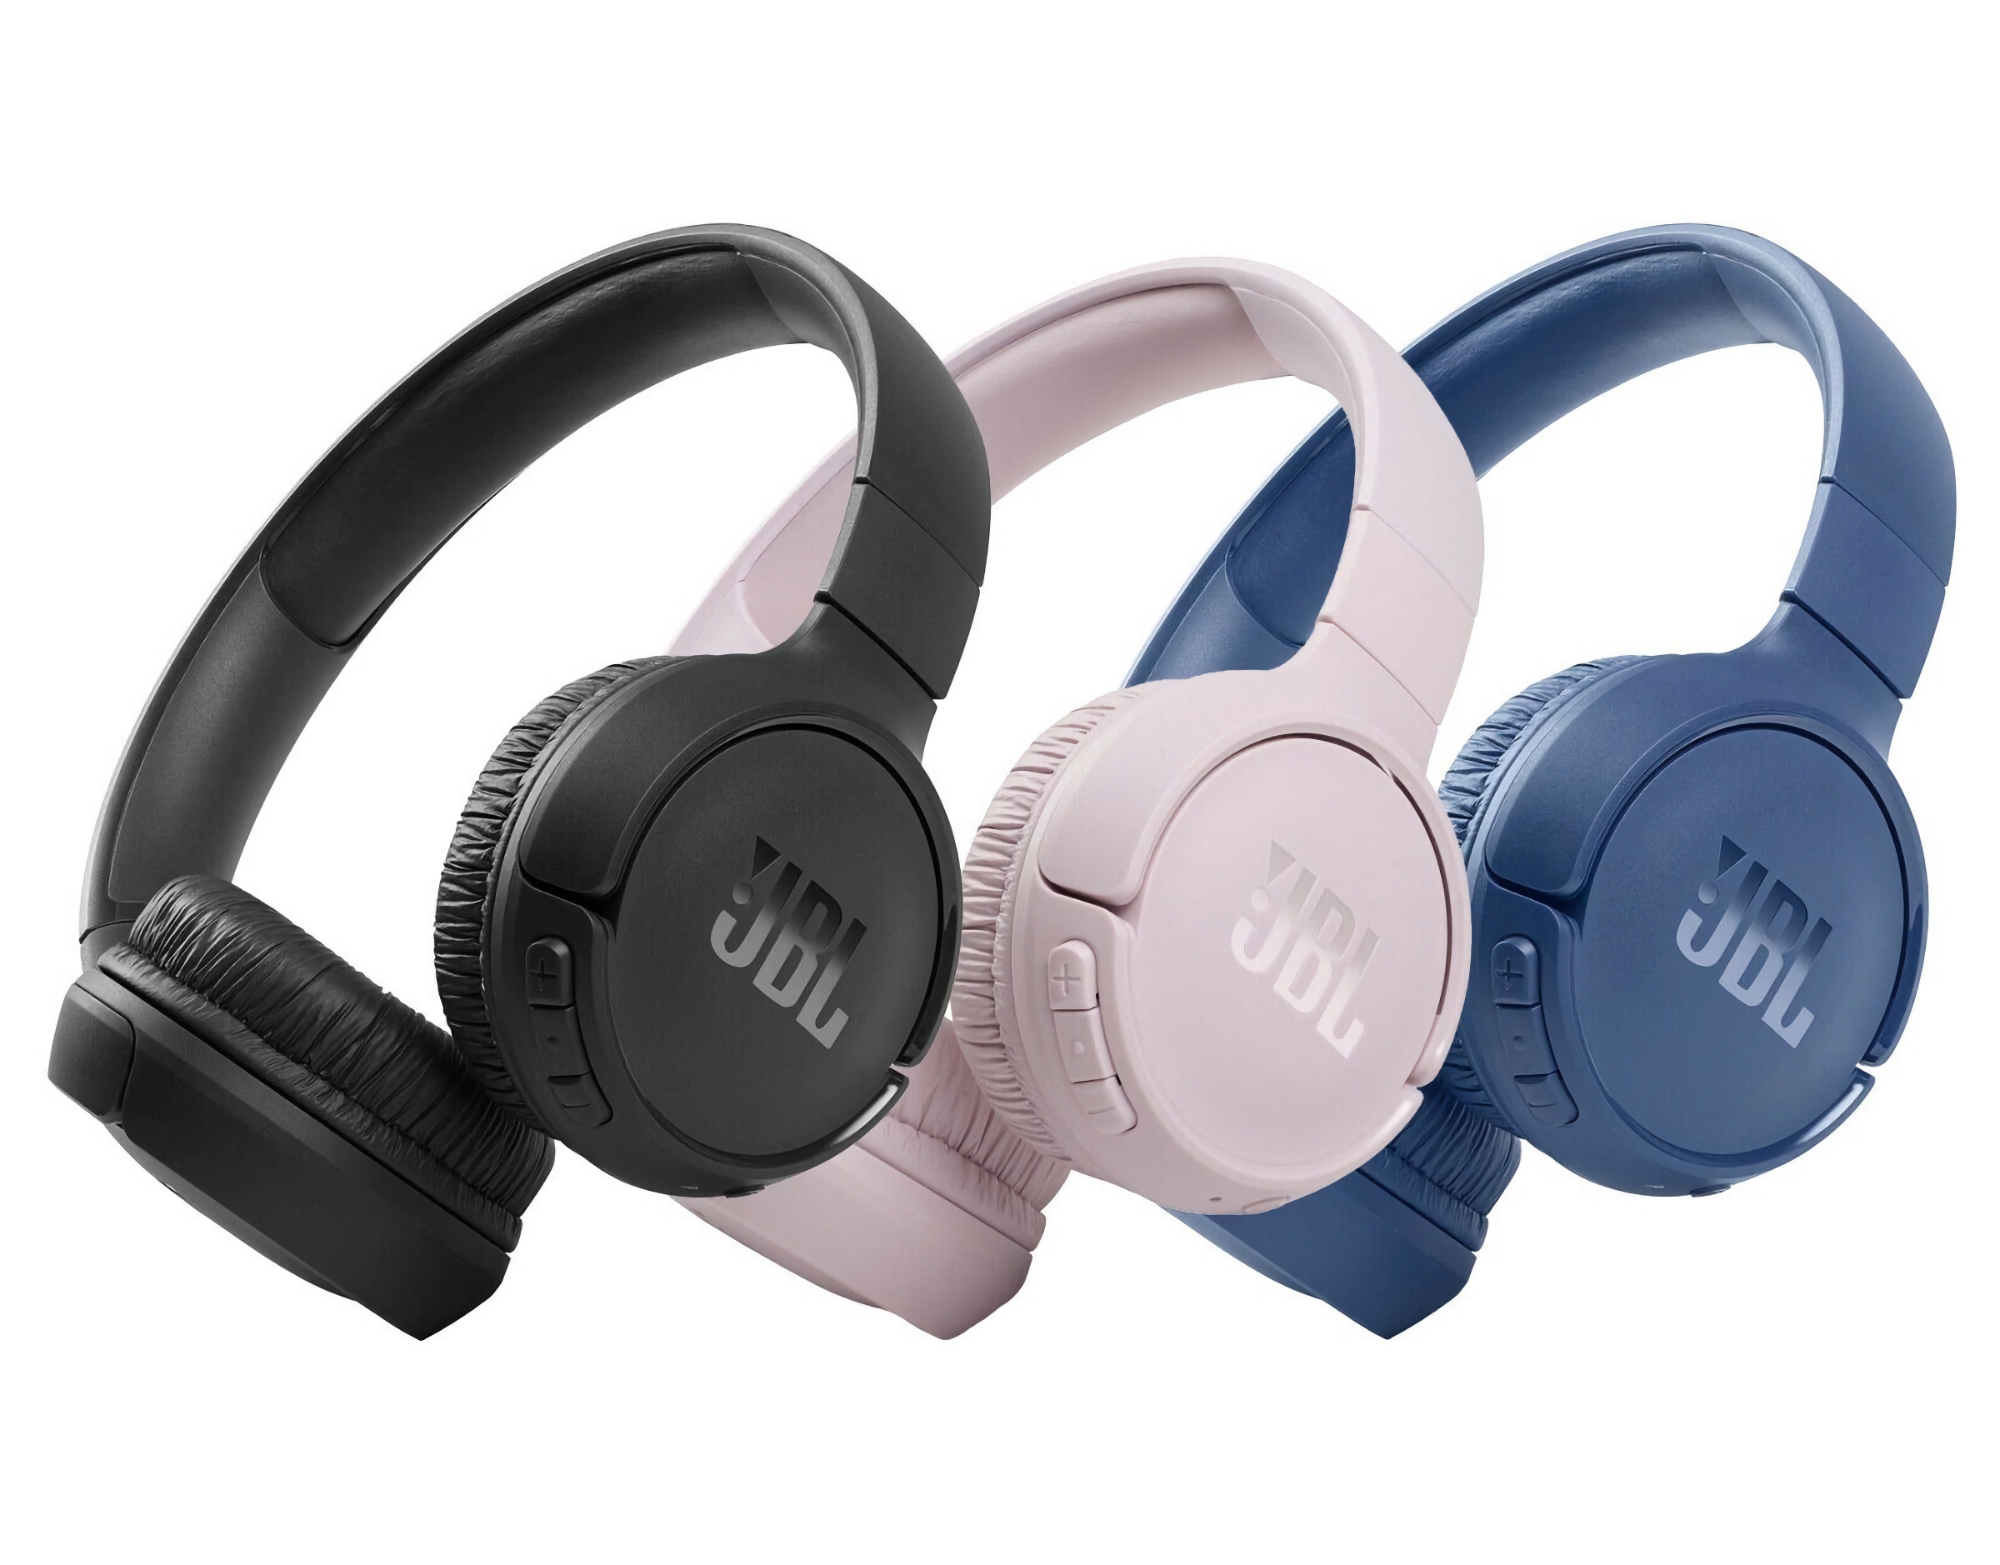 Limited time deal: JBL Tune 510BT can be purchased on Amazon for $29 (40% off)